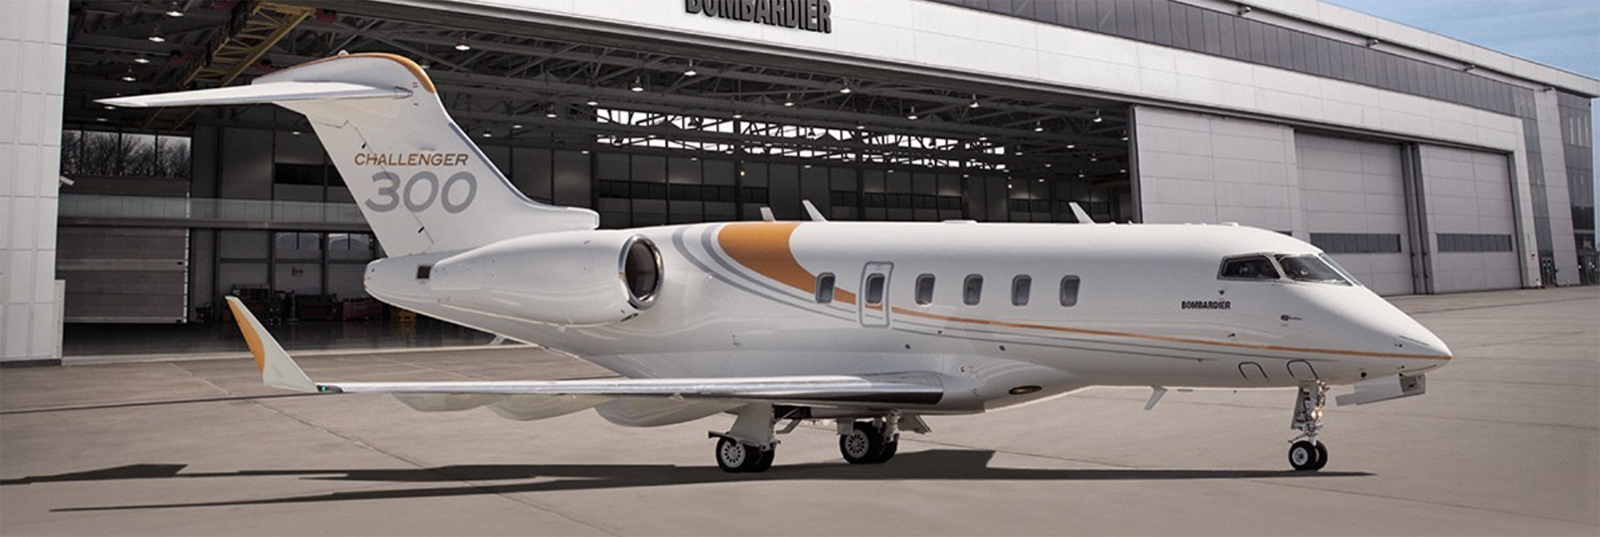 Side view of general aviation Challenger 300.